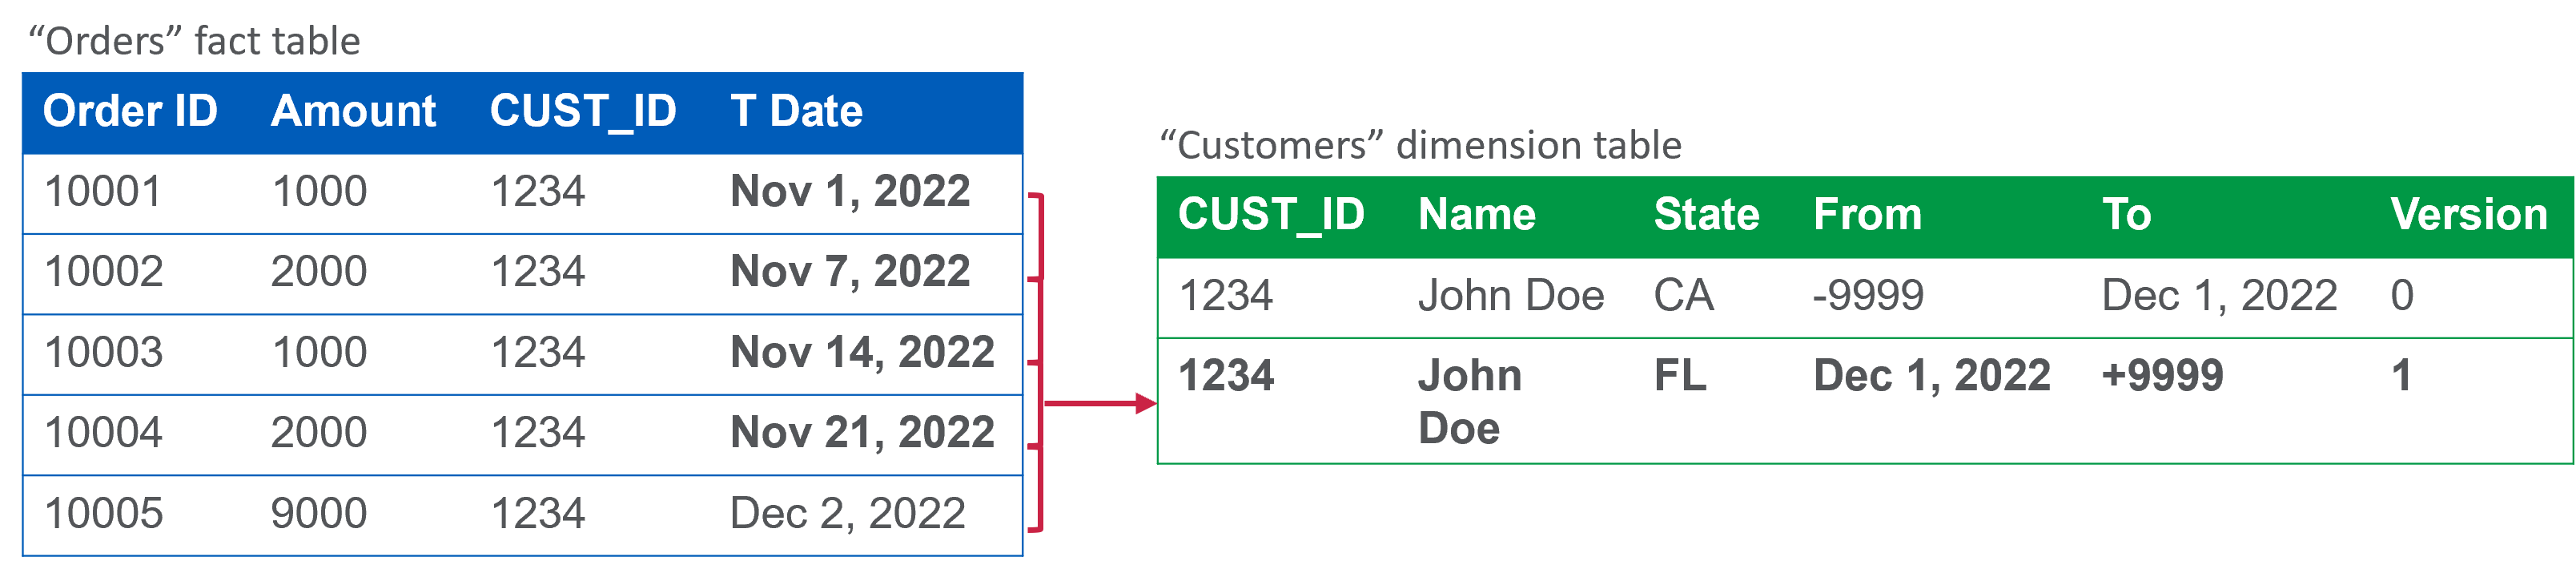 Shows the relationship between the Orders fact table and the Customers dimension when Use current data is selected.